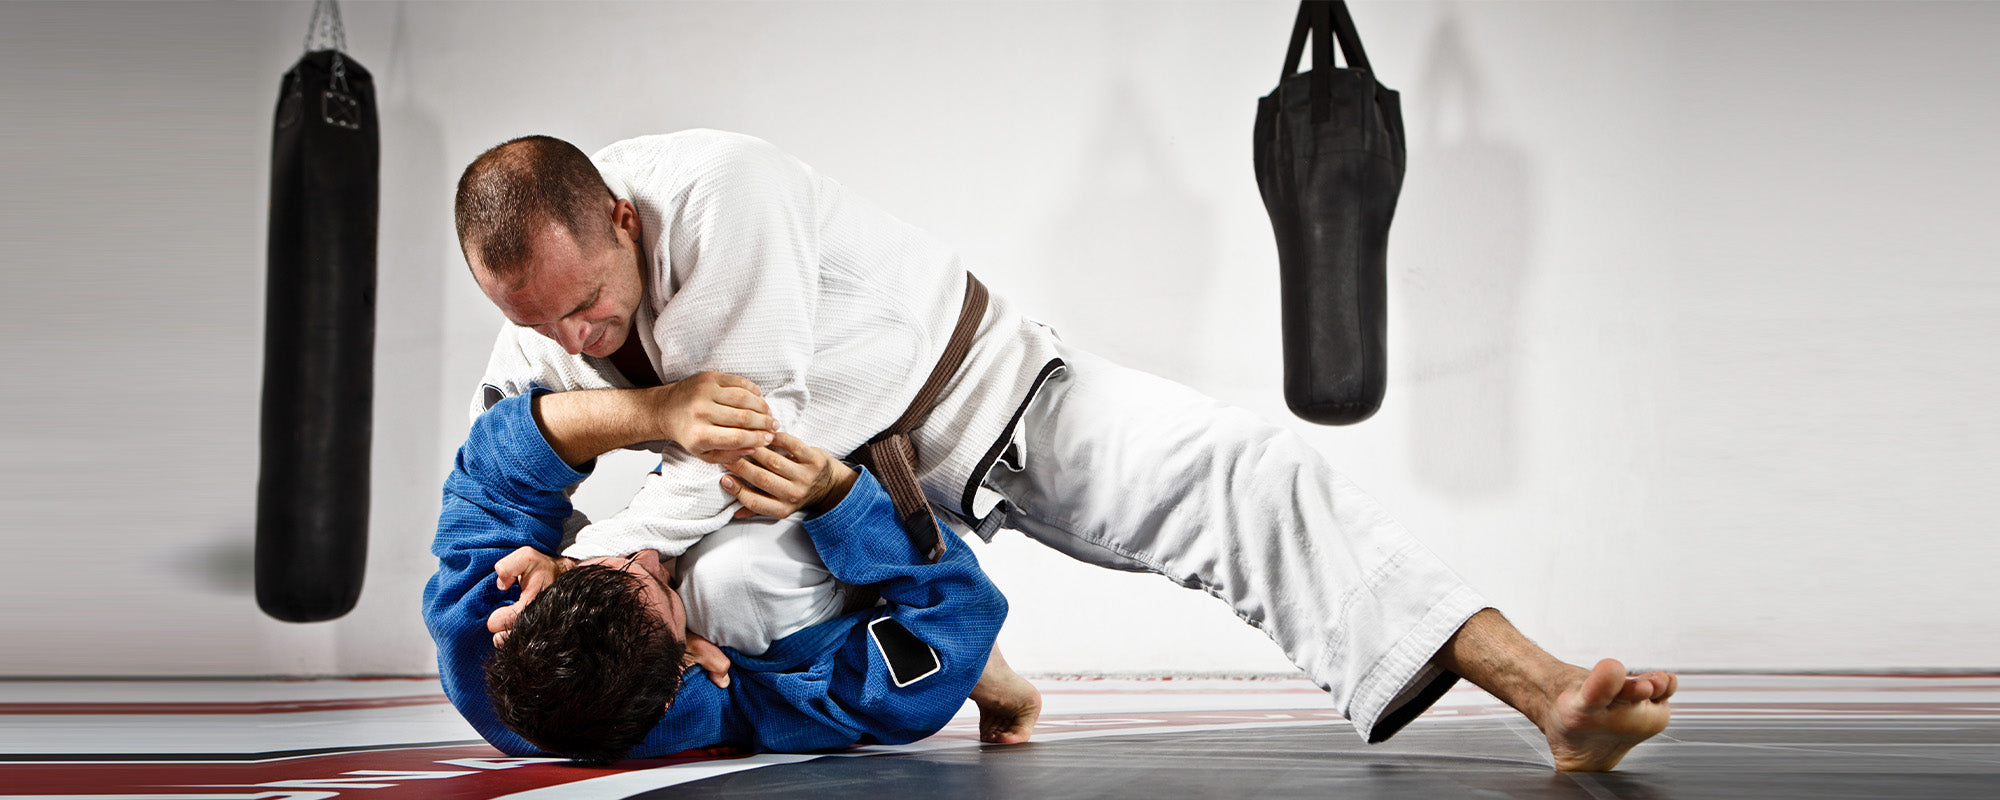 How to Know if Brazilian Jiu-Jitsu is the Right Sport for You?